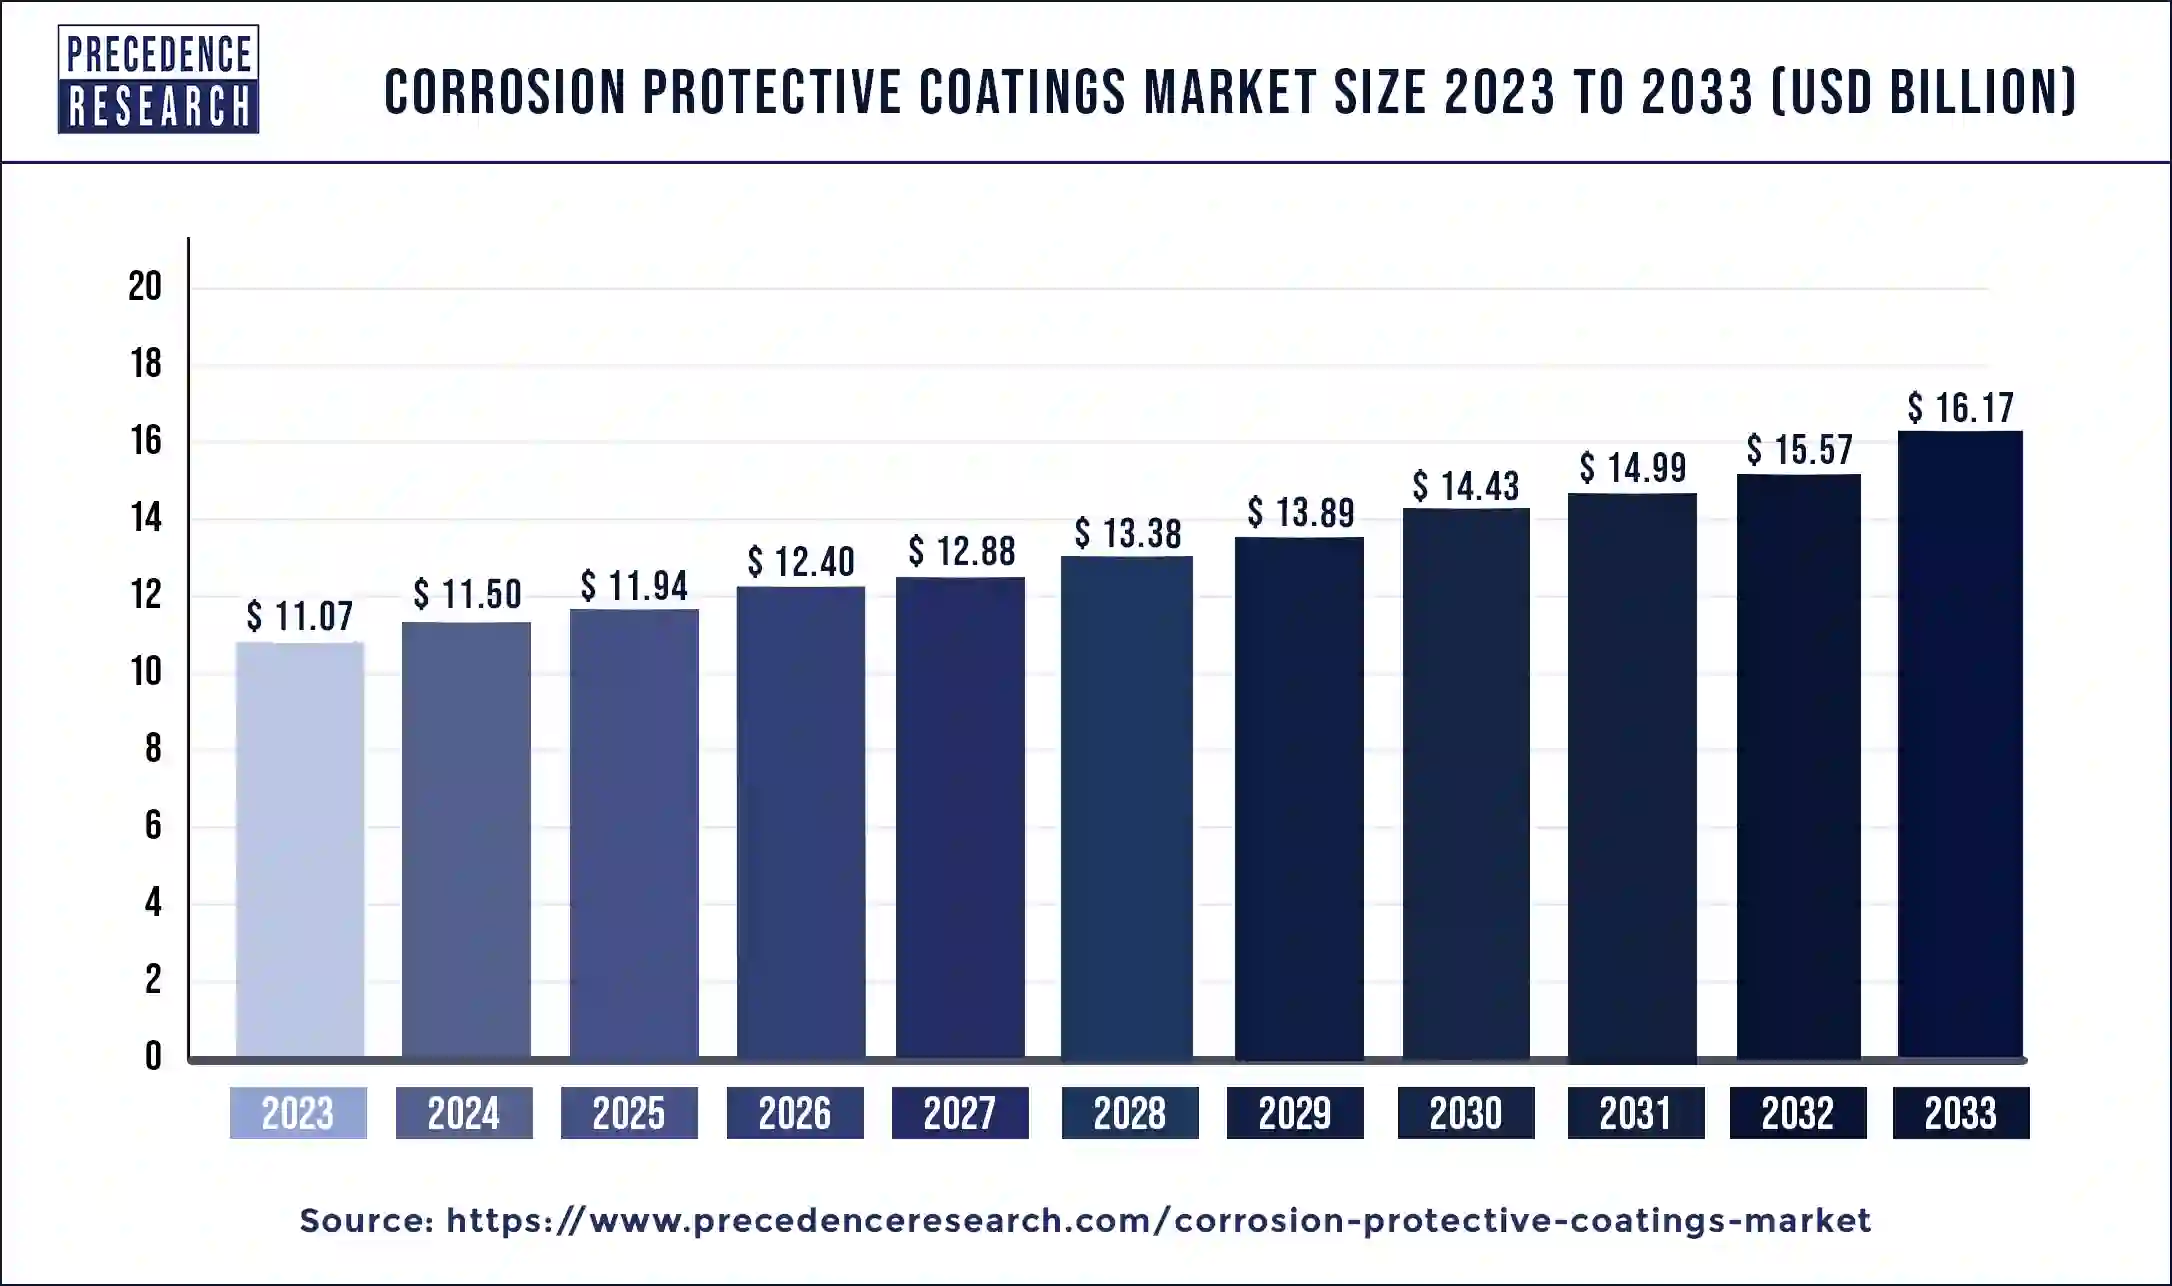  Corrosion Protective Coatings Market Size 2024 to 2033